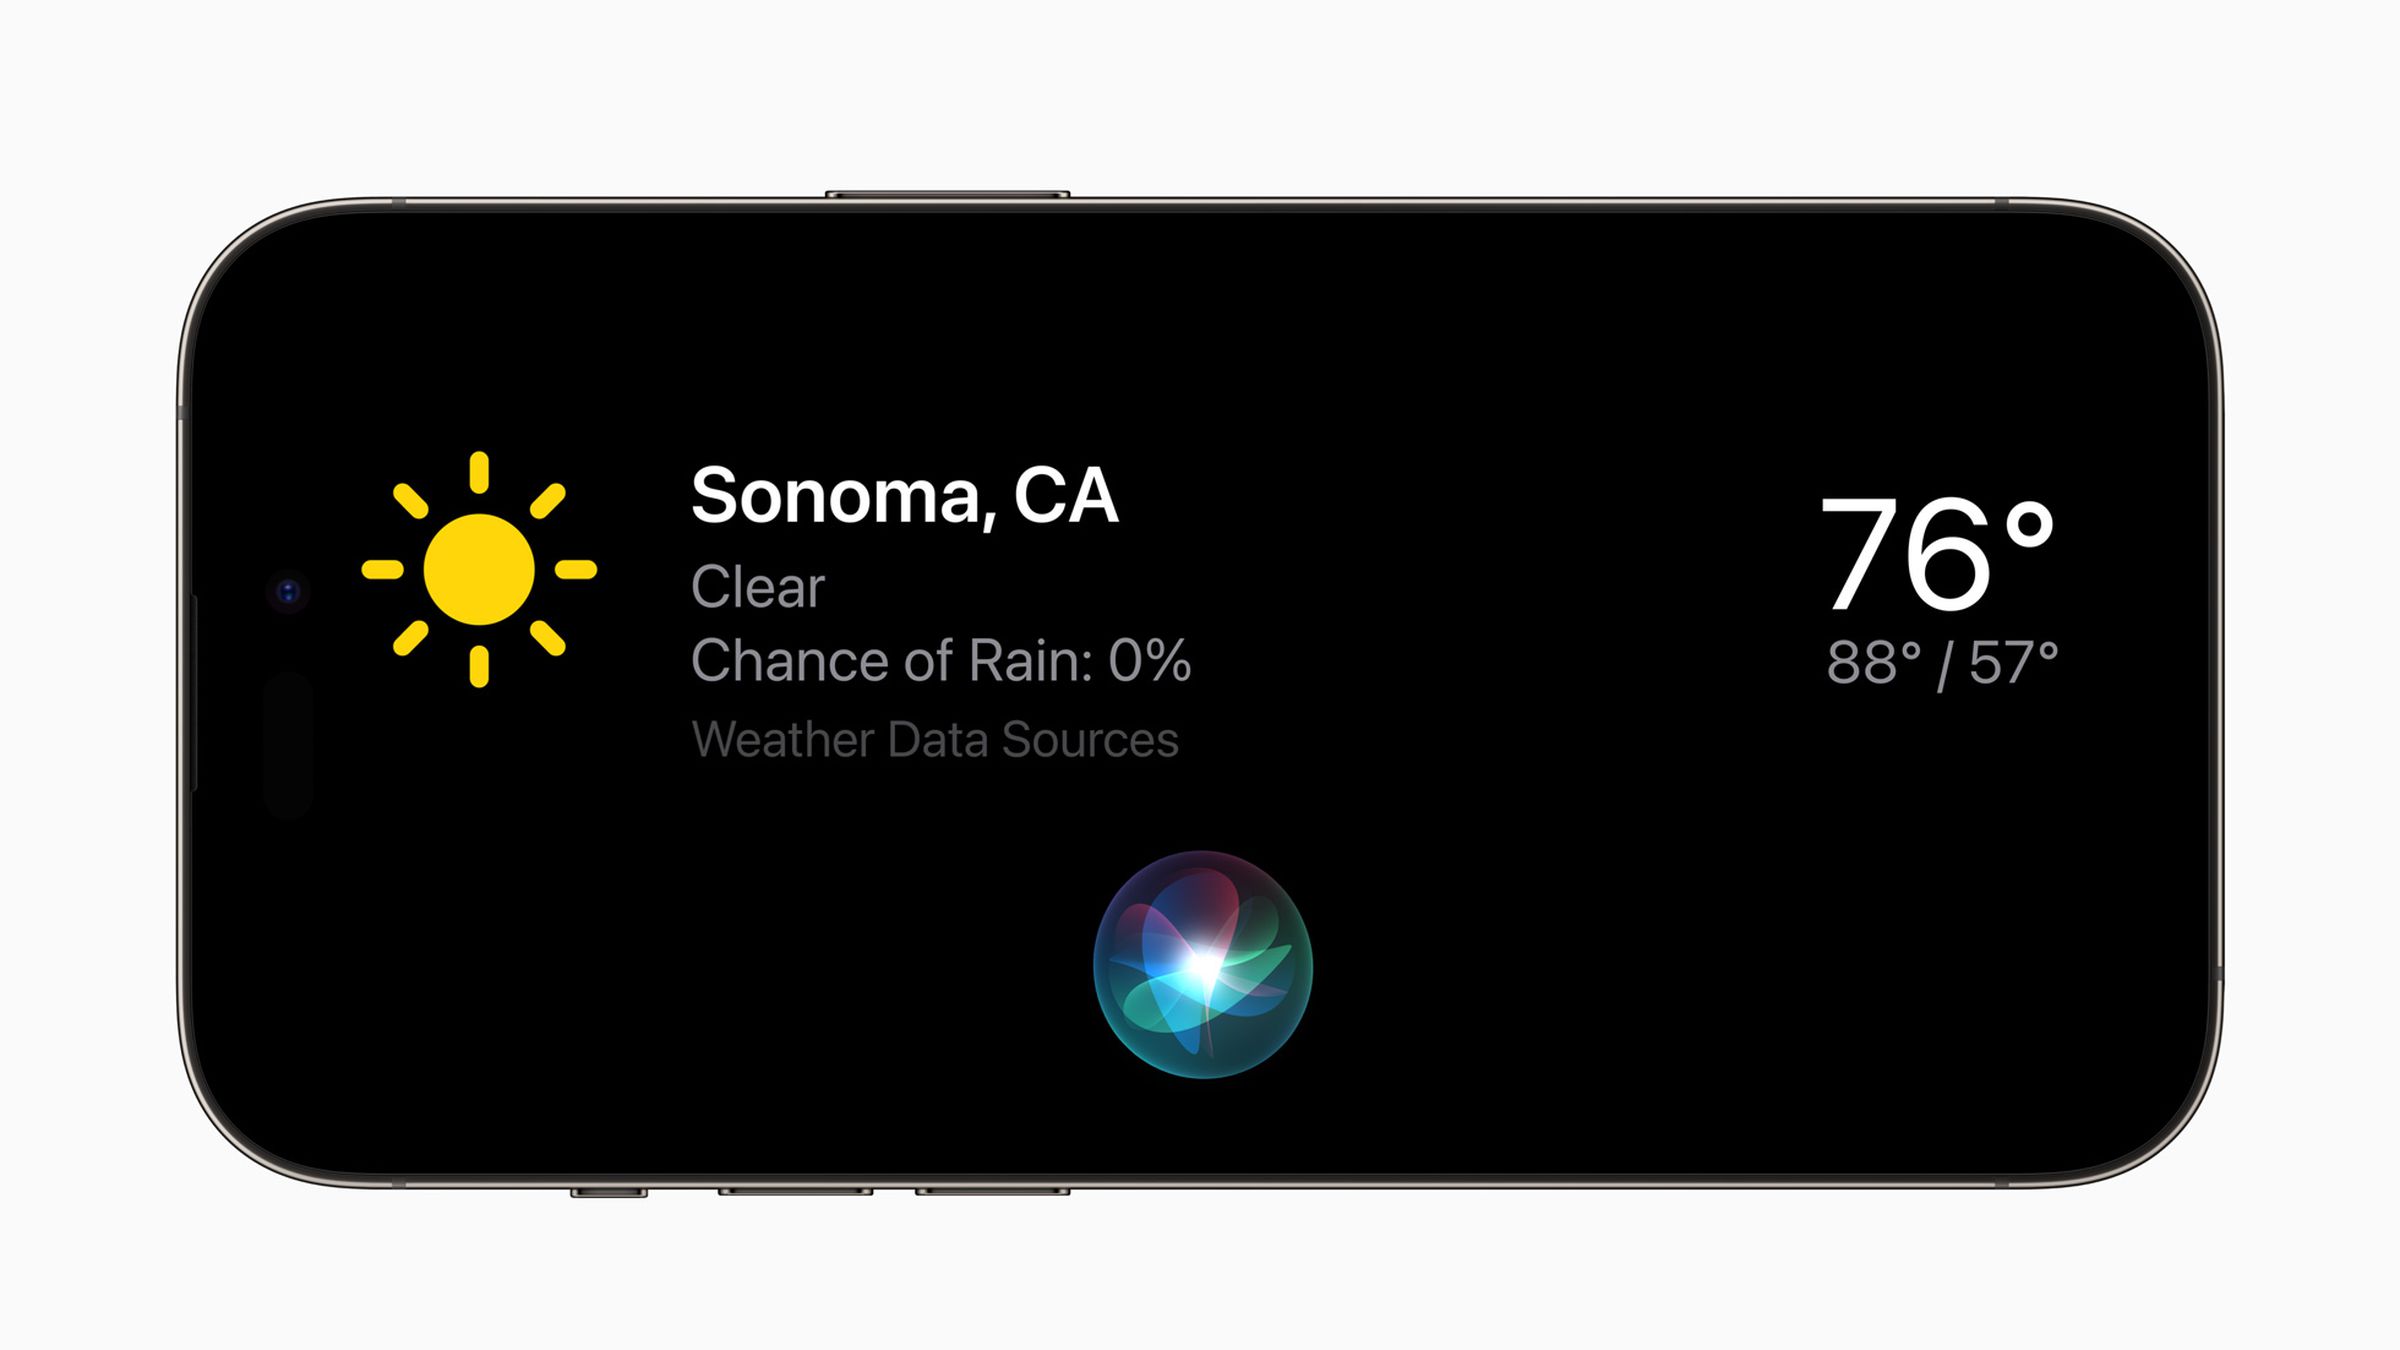 <em>It can respond to Siri requests and display visual responses, like the weather forecast.</em>